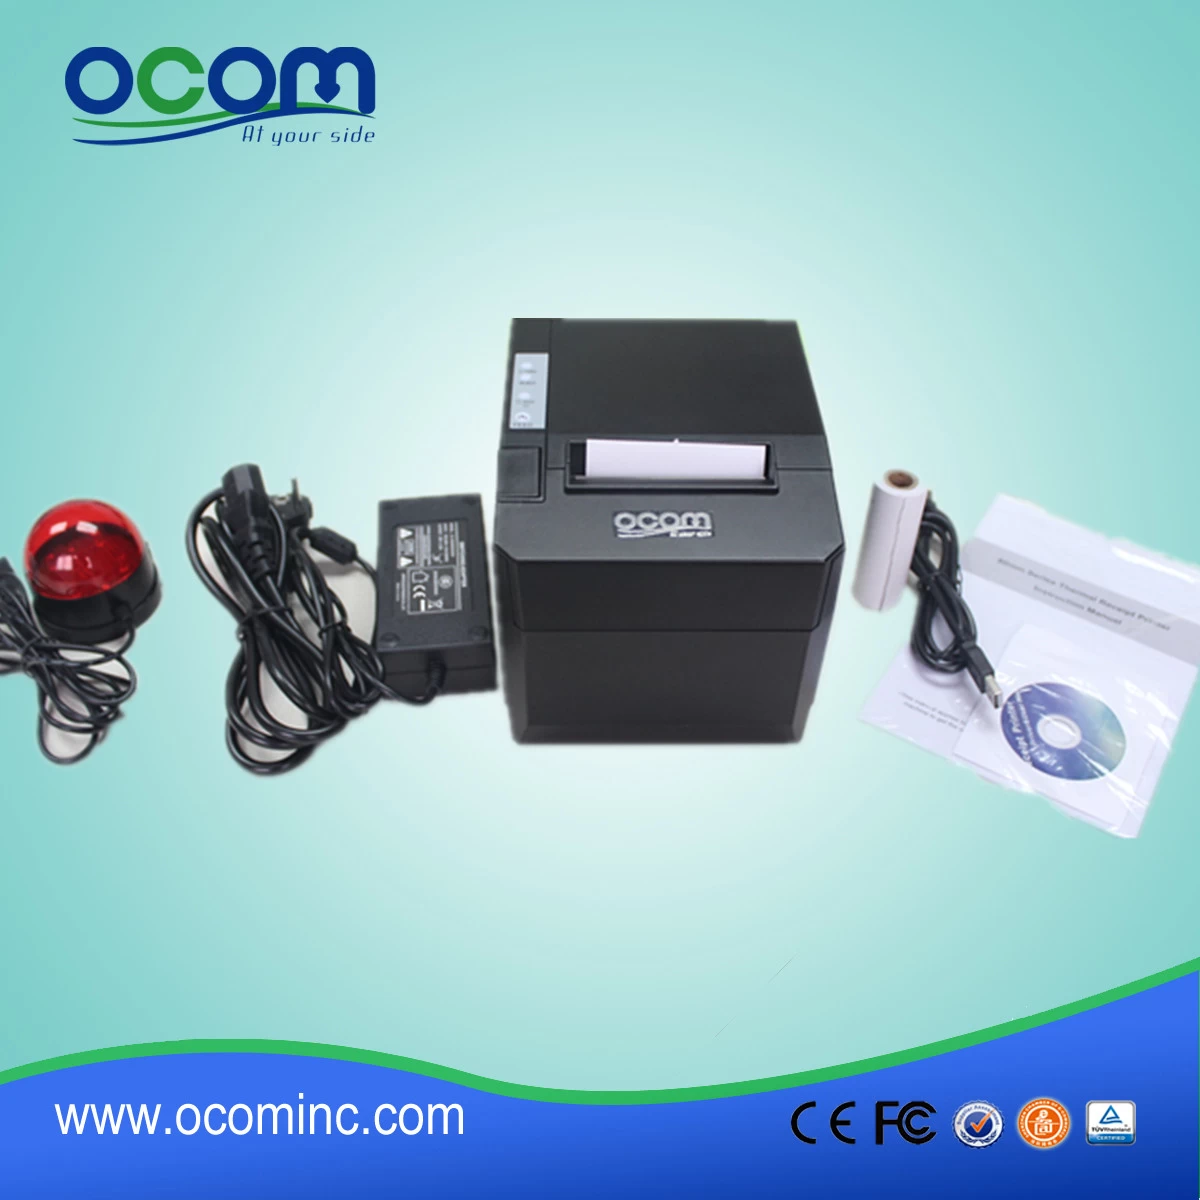 Re: China made low cost 80mm WIFI POS printer-OCPP-88A-W